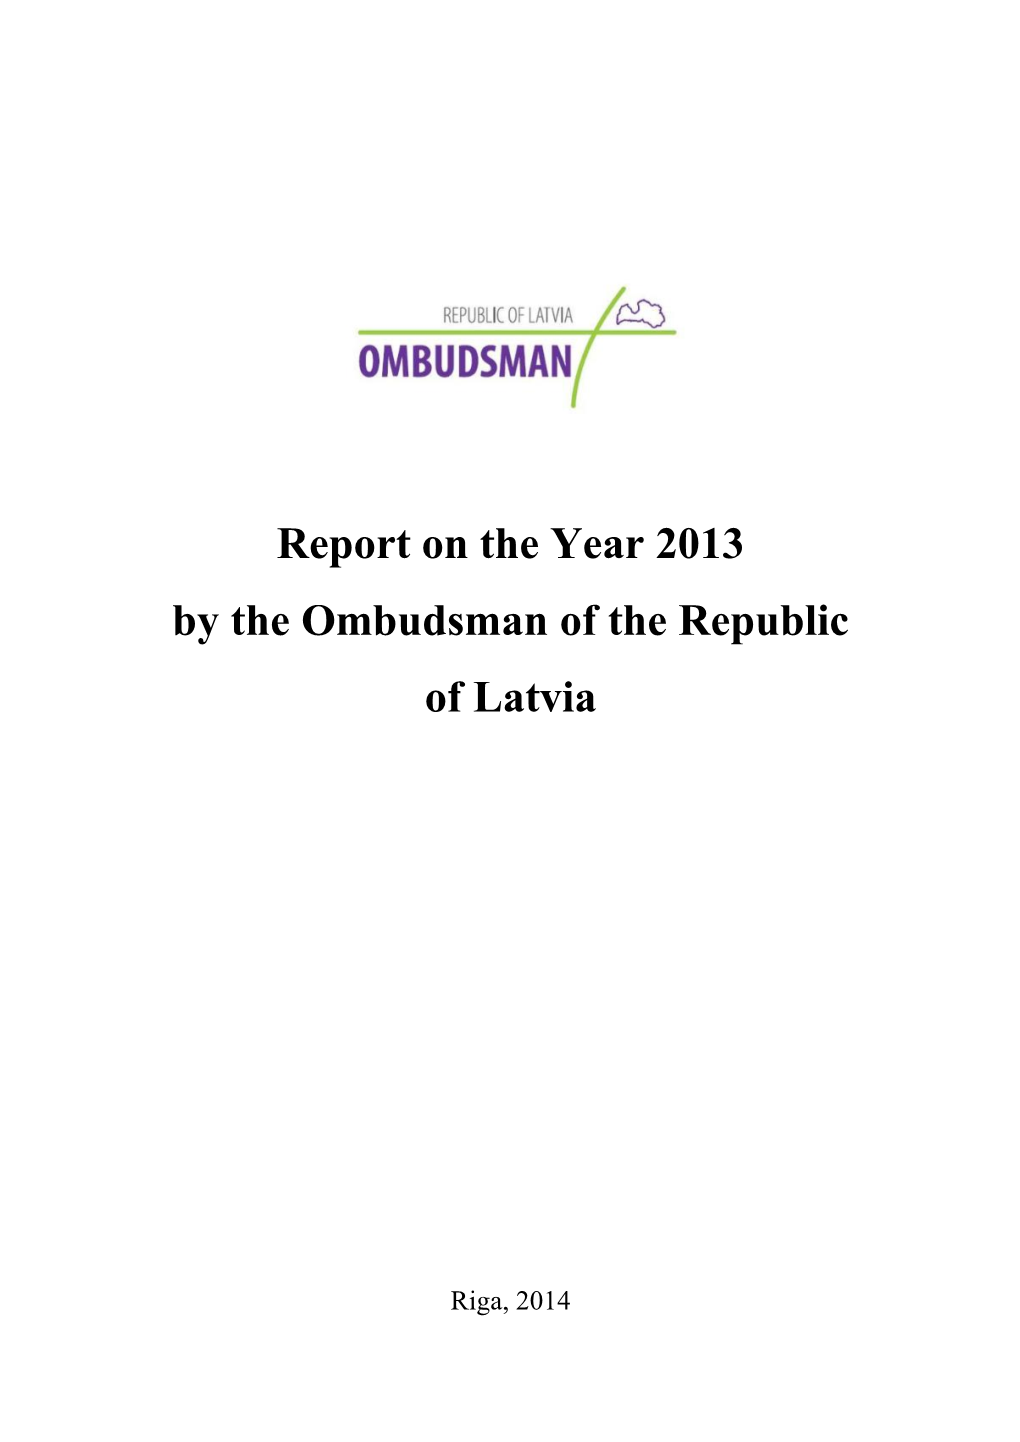 Report on the Year 2013 by the Ombudsman of the Republic of Latvia